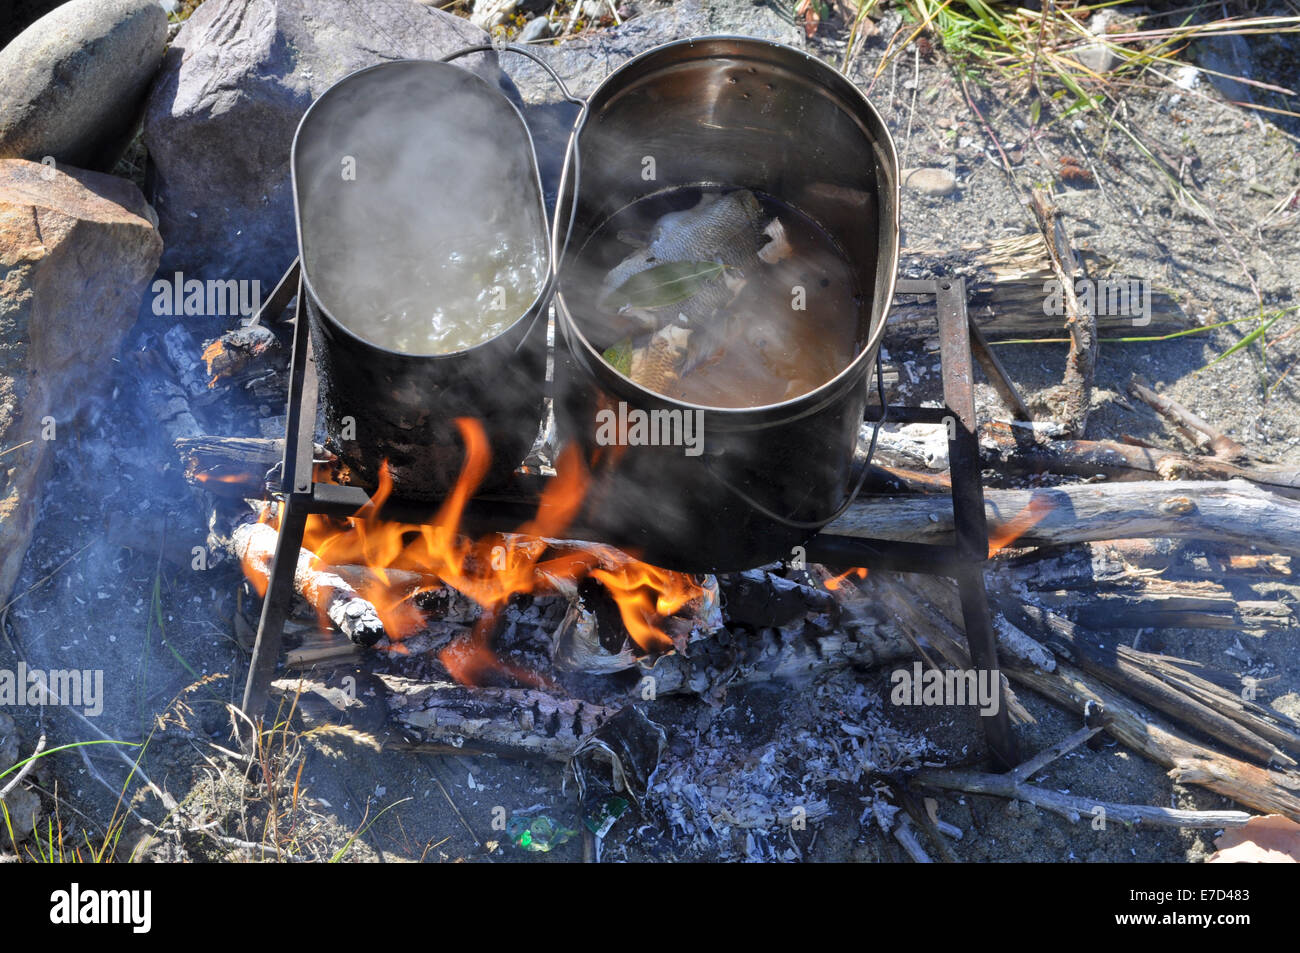 https://c8.alamy.com/comp/E7D483/cooking-fish-on-the-fire-tourist-fire-trivet-and-two-pot-that-cooked-E7D483.jpg